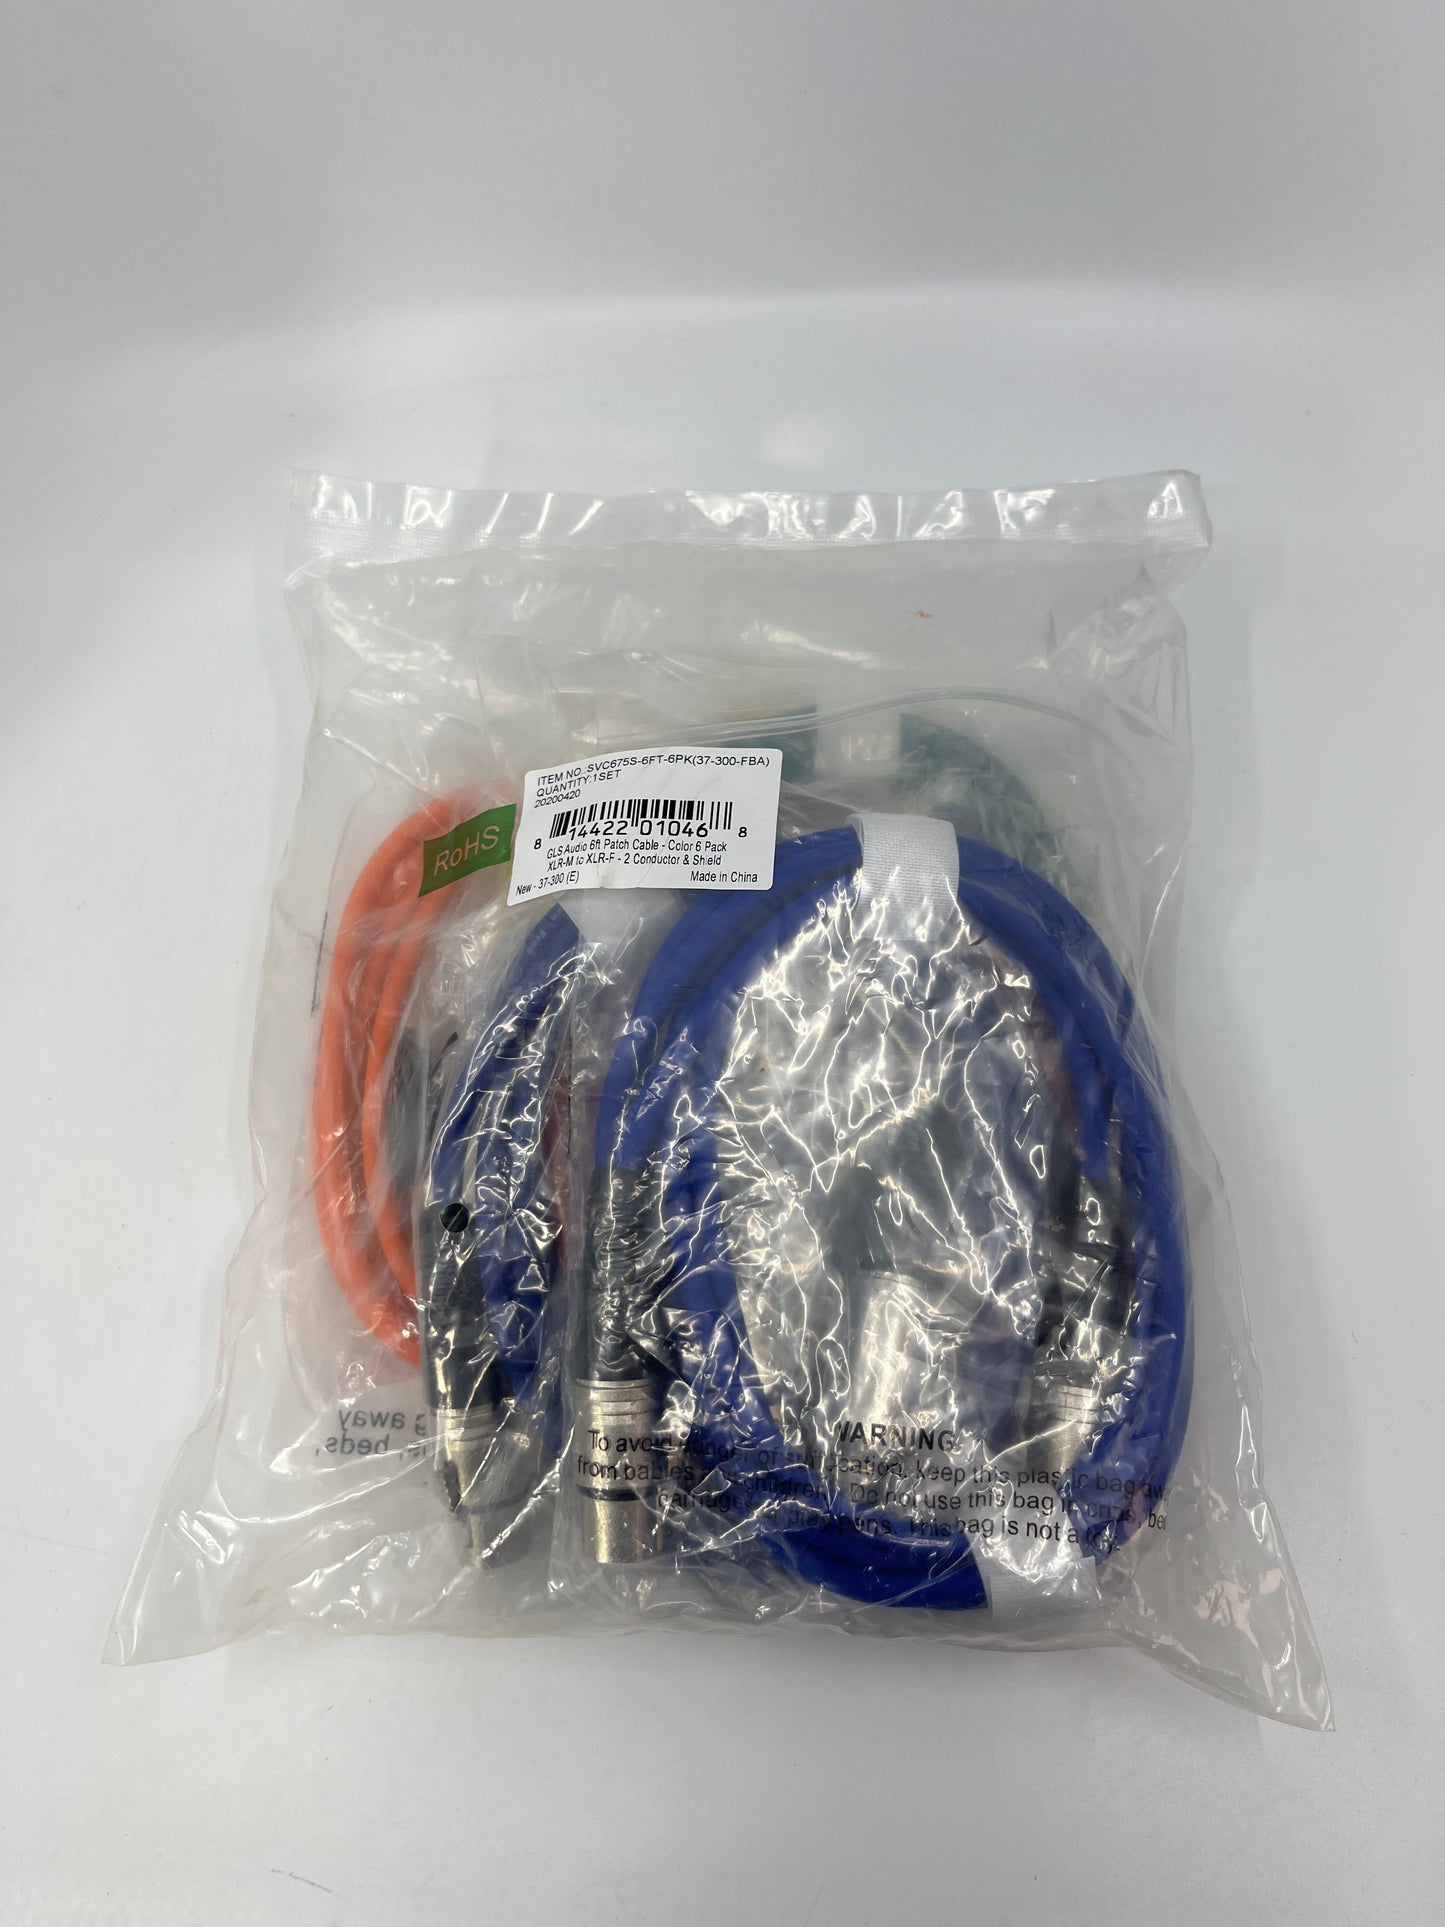 GLS Audio 6ft Patch Cable Cords XLR Male to Female Color Cables - 6 Count